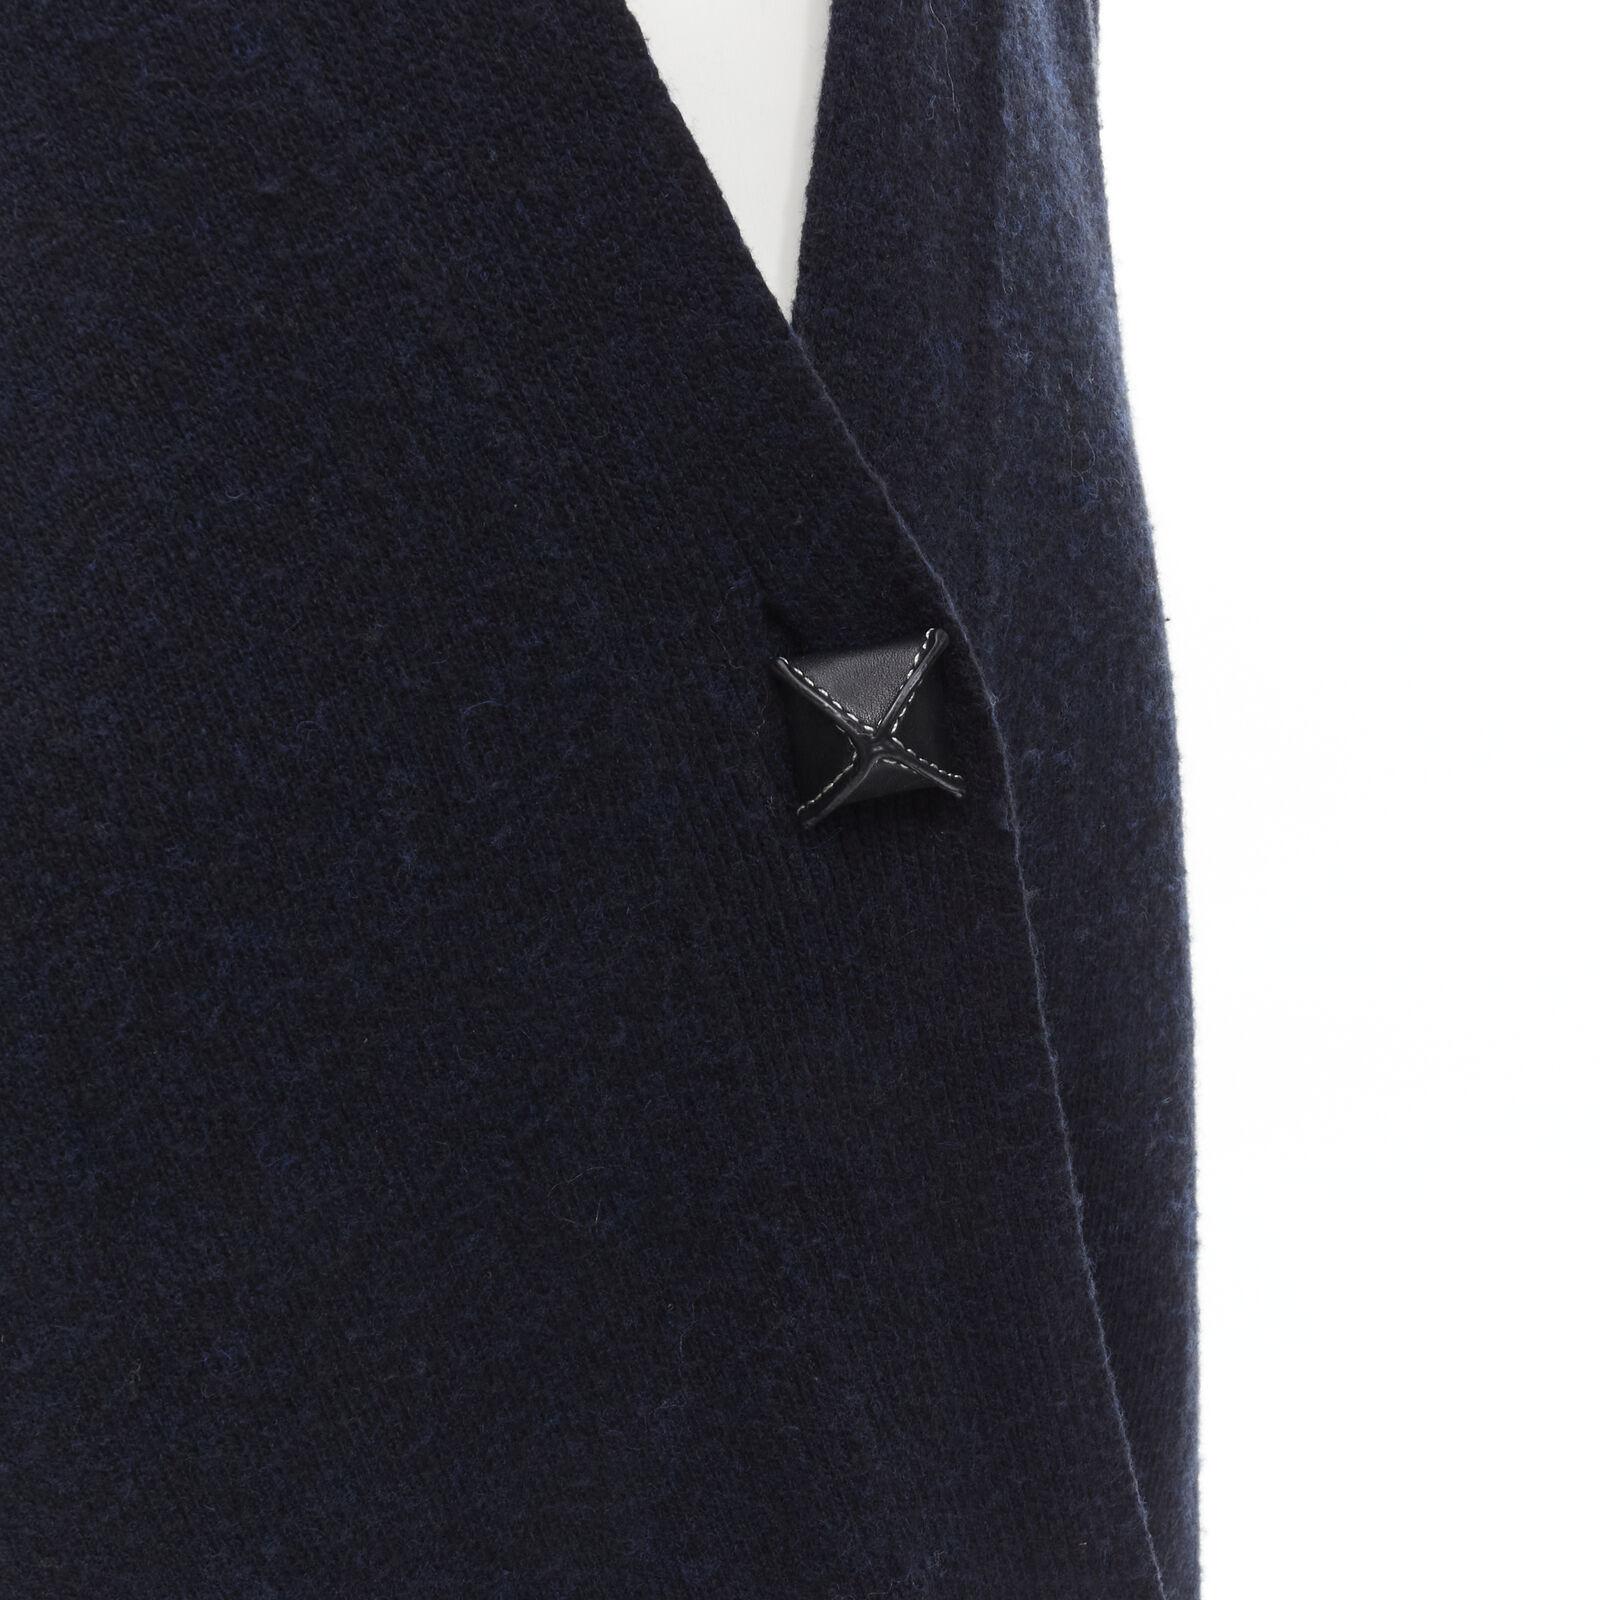 HERMES 100% cashmere Medor leather button navy black long line cardigan FR36 XS
Reference: TGAS/C01495
Brand: Hermes
Material: 100% Cashmere
Color: Navy, Black
Pattern: Solid
Closure: Button
Lining: Unlined
Extra Details: 100% cashmere. Navy blue